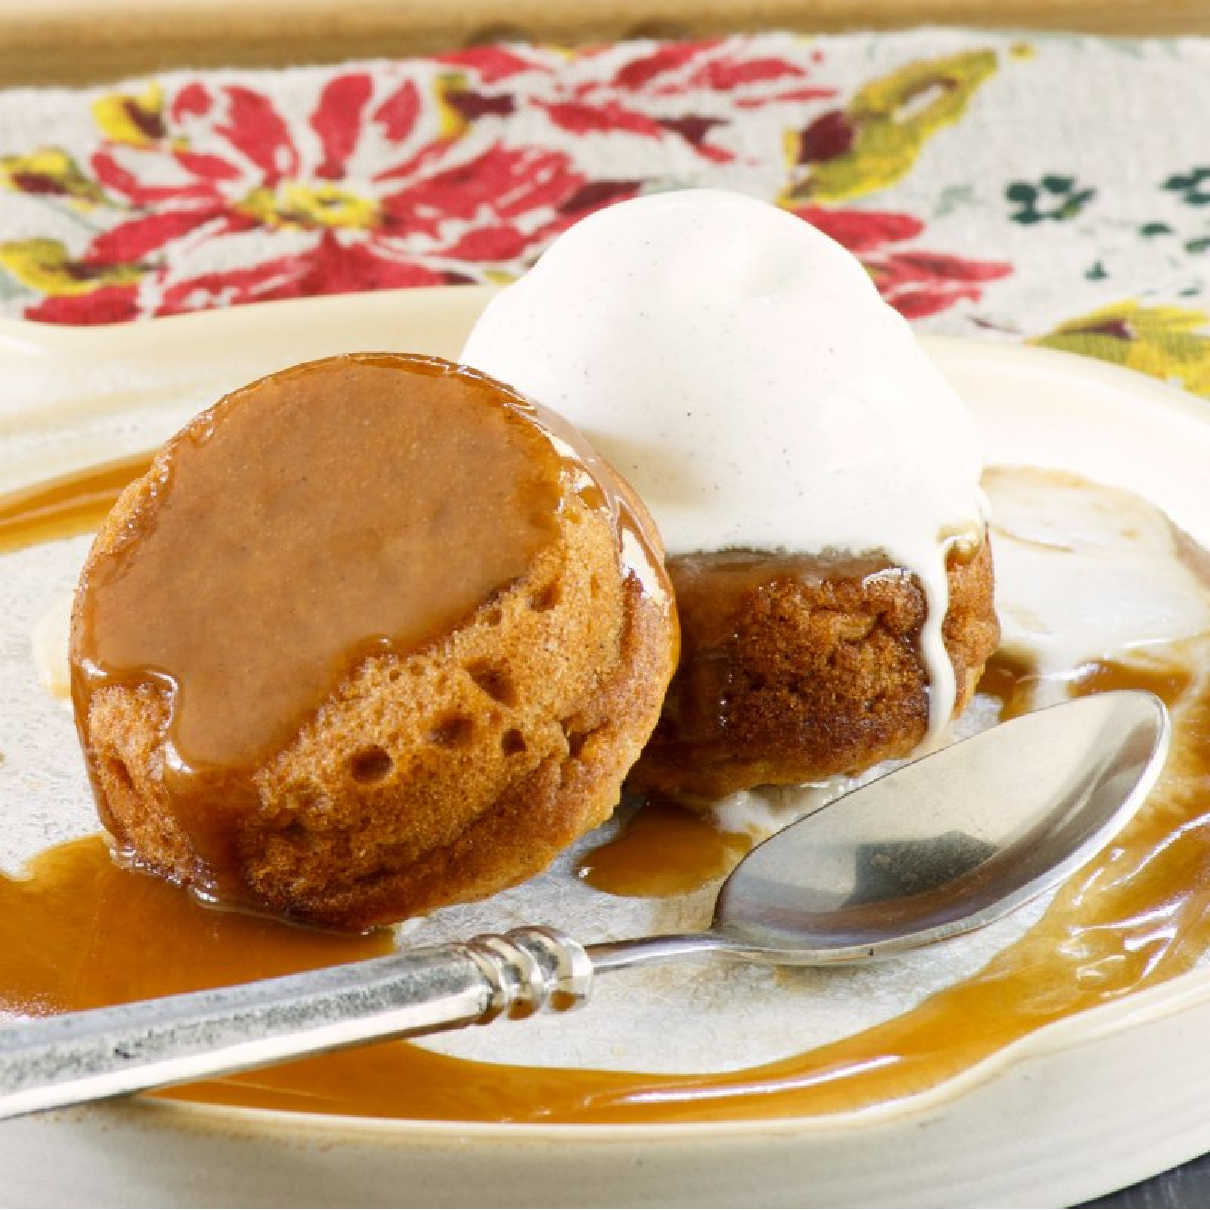 Two mini sweet potato cakes served with caramel sauce and a scoop of vanilla ice cream.